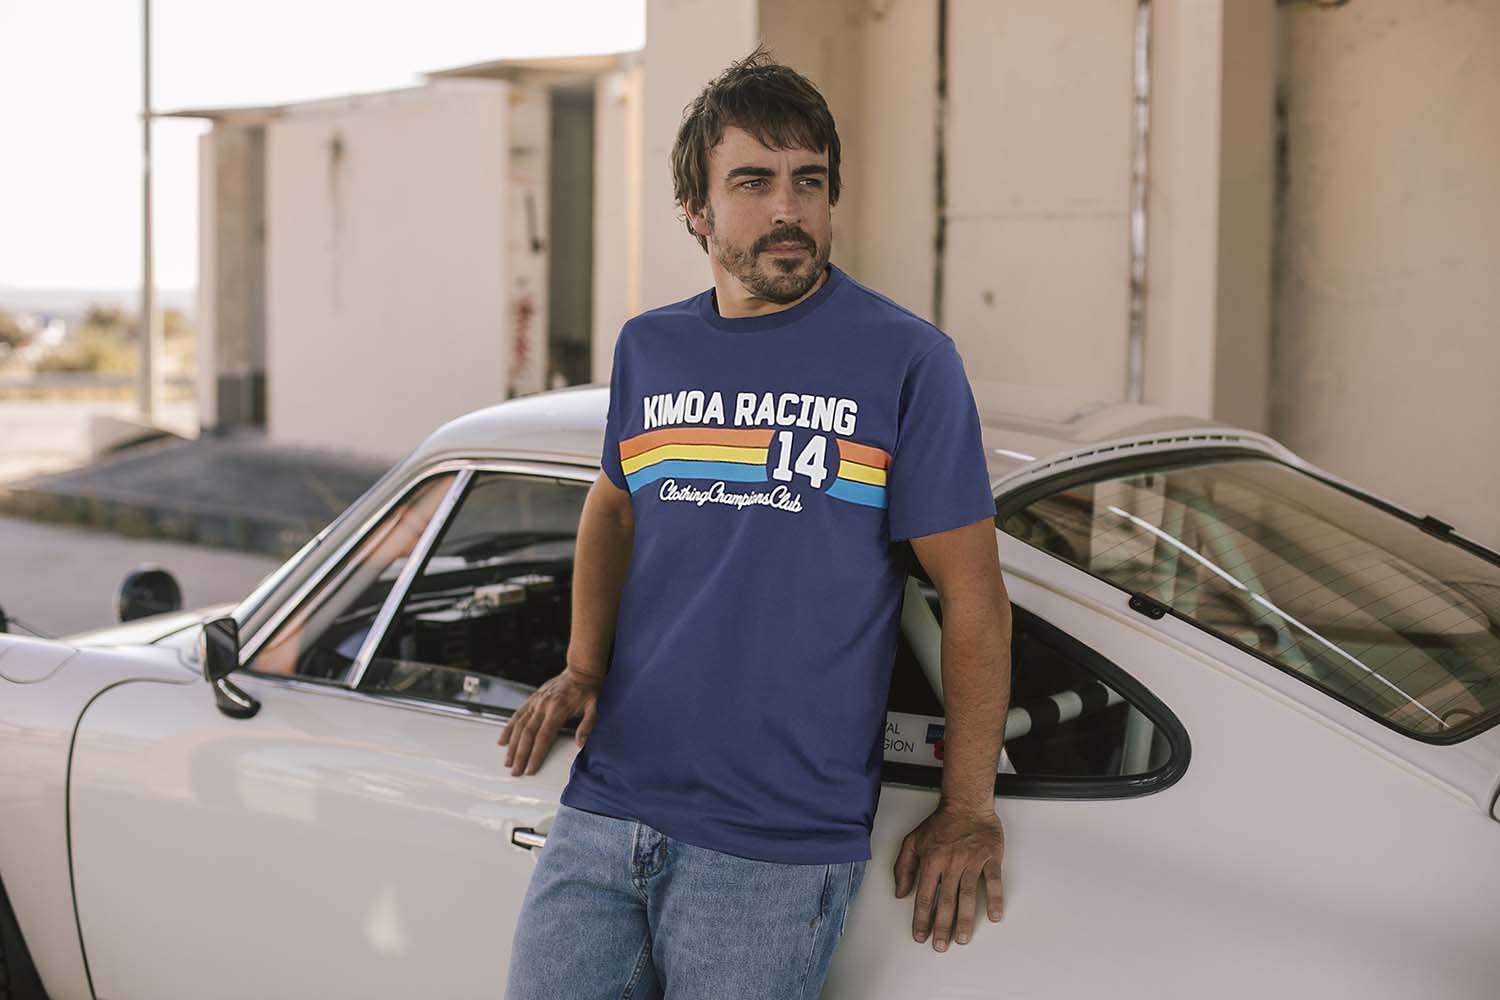 Two-Time F1 Champion Fernando Alonso’s Kimoa Brand Acquired by SimplyEV Parent Company